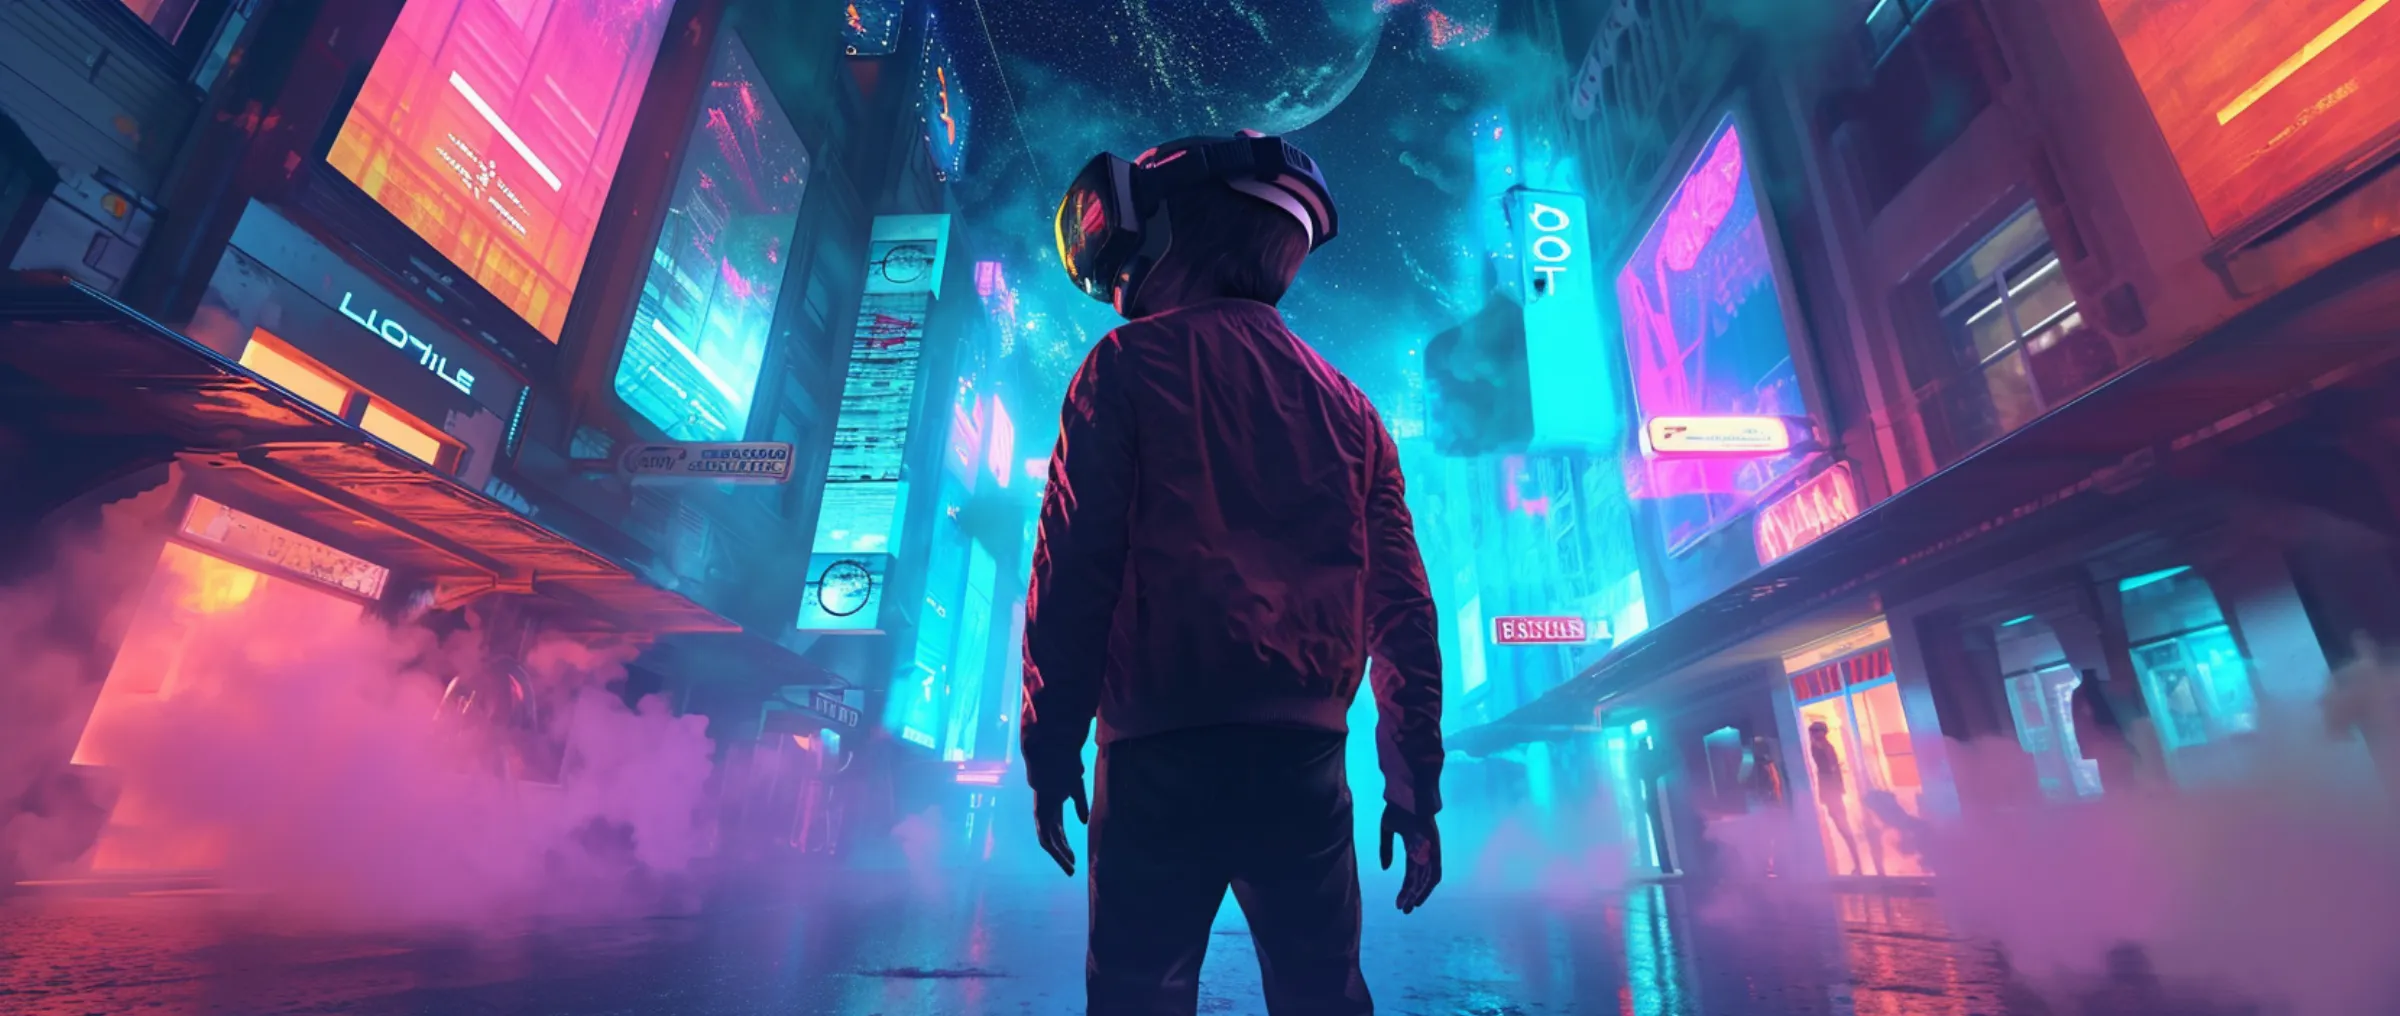 Ready Player One Creator Ernest Cline Launches Metaverse Studio